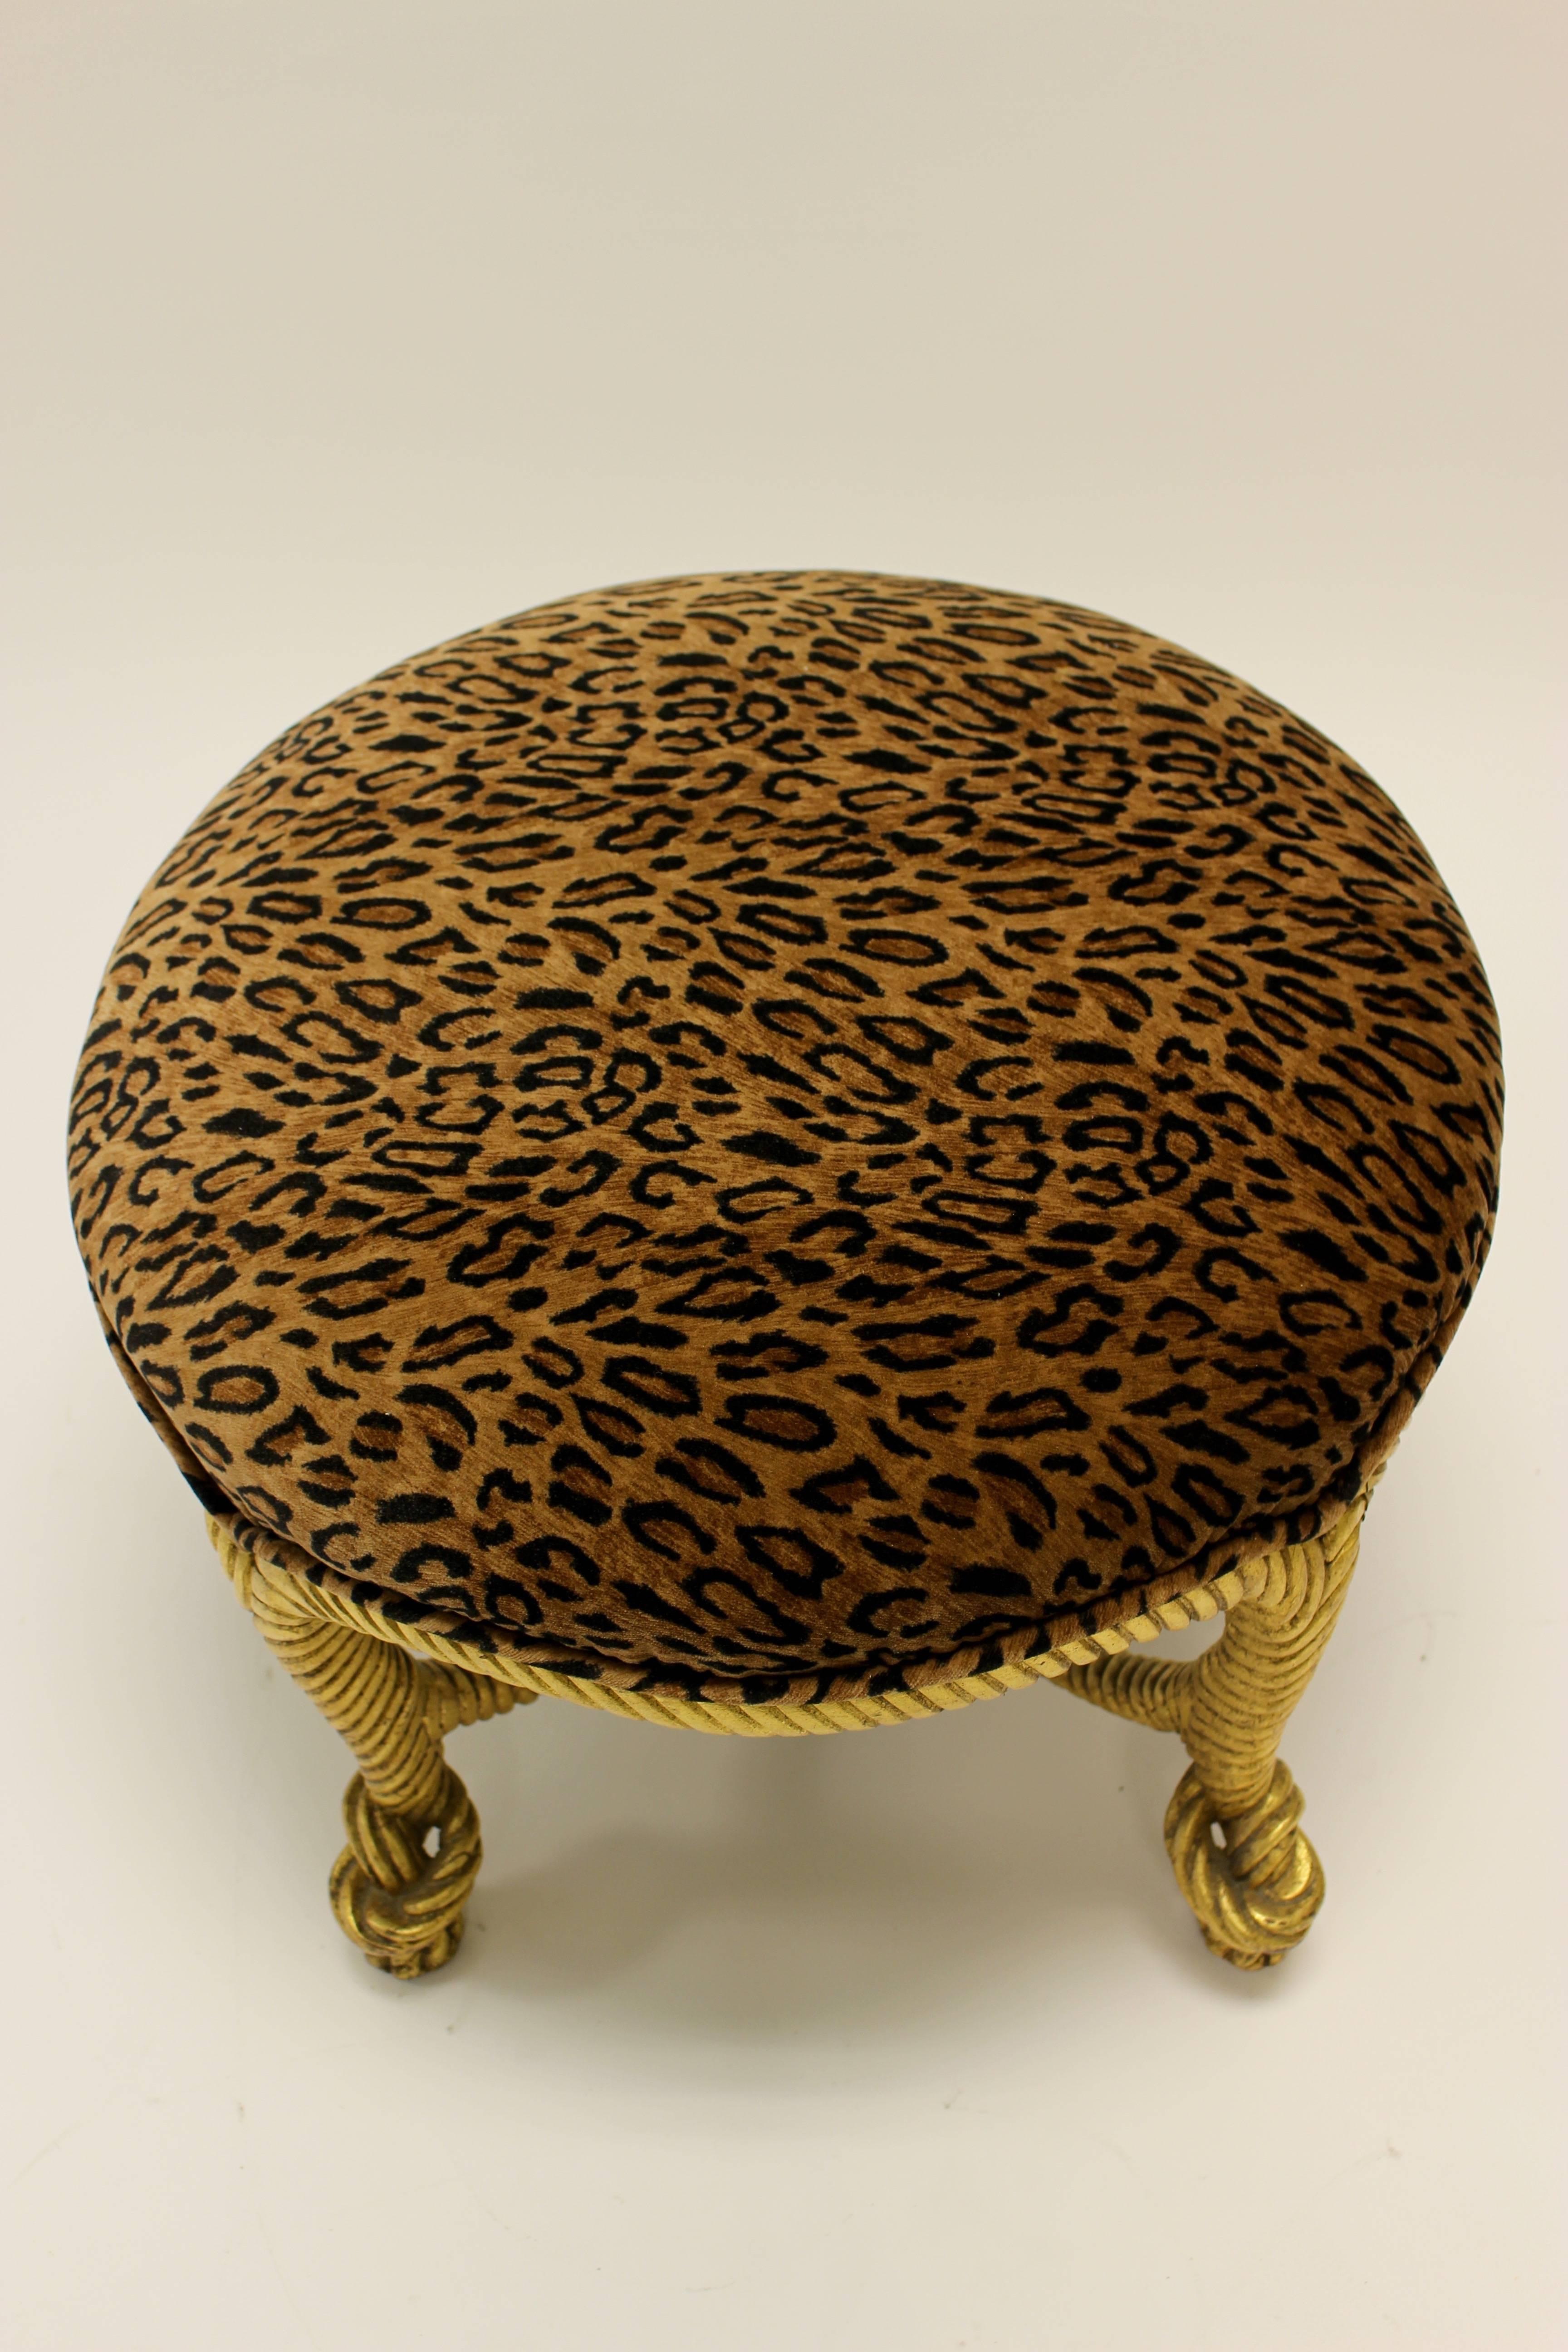 French Decorative Napoleon III Style Giltwood Rope Stool with Animal Fabric In Good Condition For Sale In Palm Desert, CA